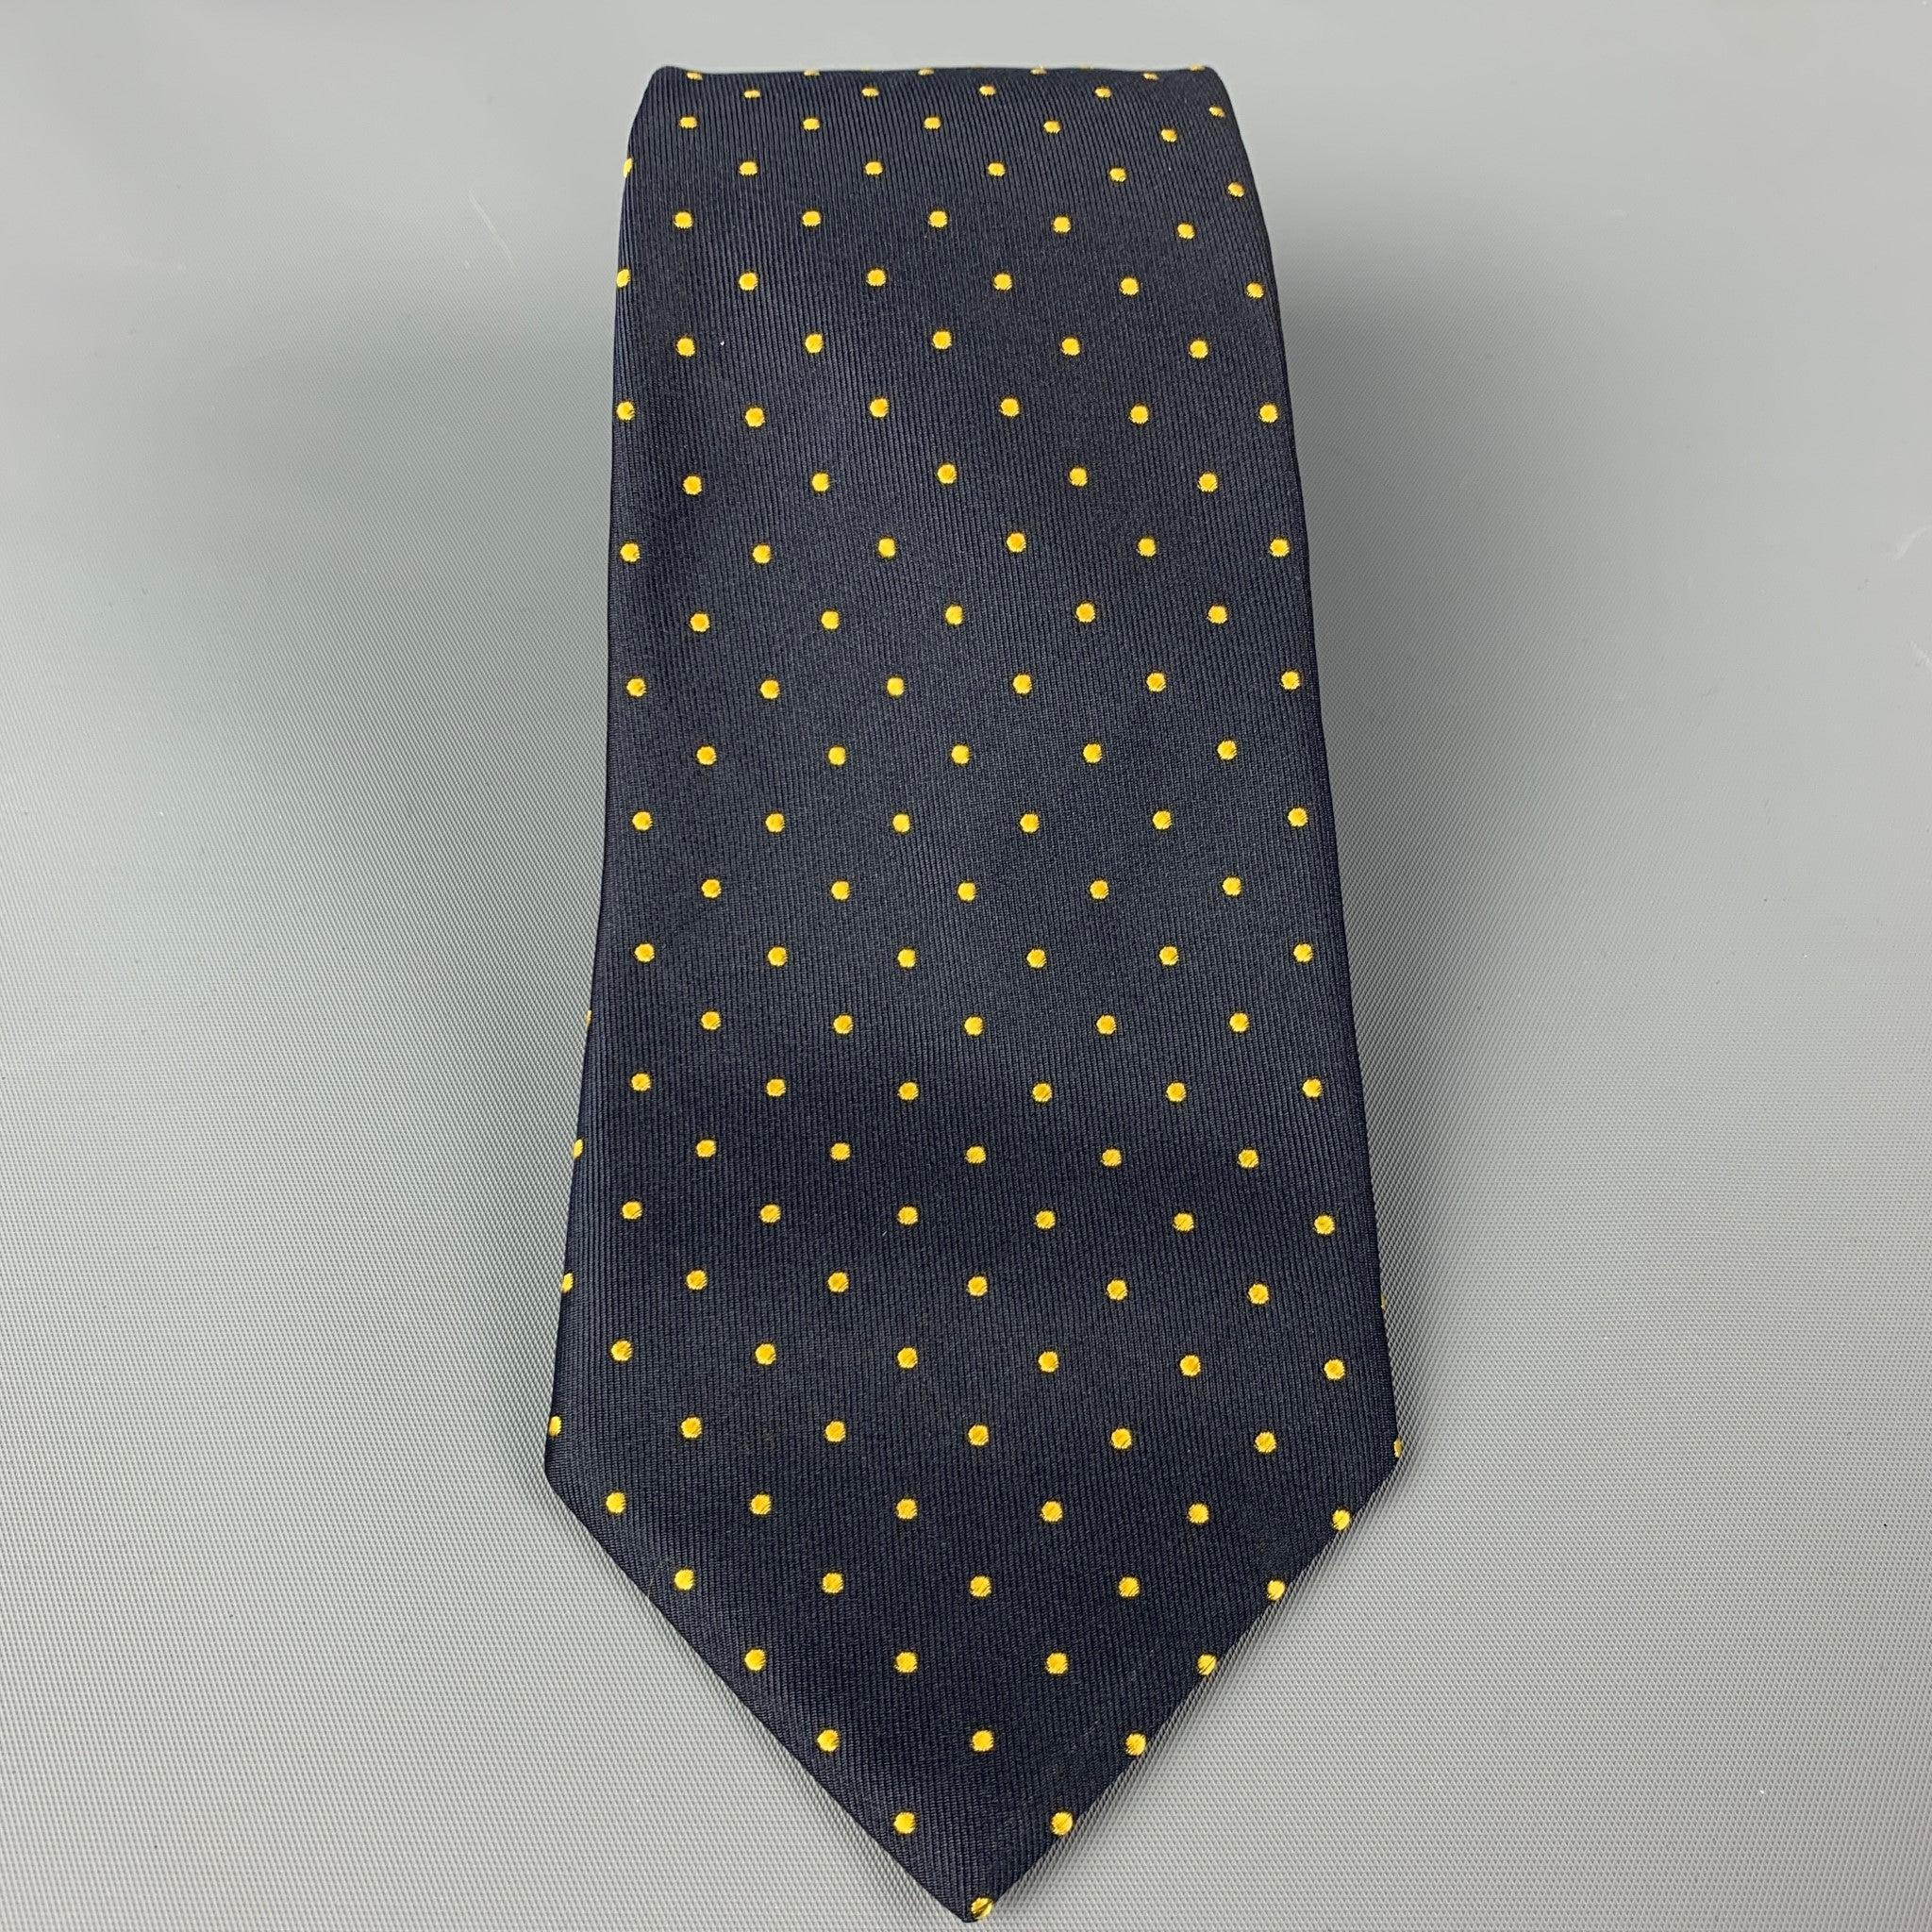 BARNEY'S NEW YORK
 necktie comes in a navy & yellow silk twill with a all over dot print. Made in Italy. Very Good Pre-Owned Condition.Width: 3.25 inches 
  
  
  
 Sui Generis Reference: 117017
 Category: Tie
 More Details
  
 Brand: BARNEY'S NEW